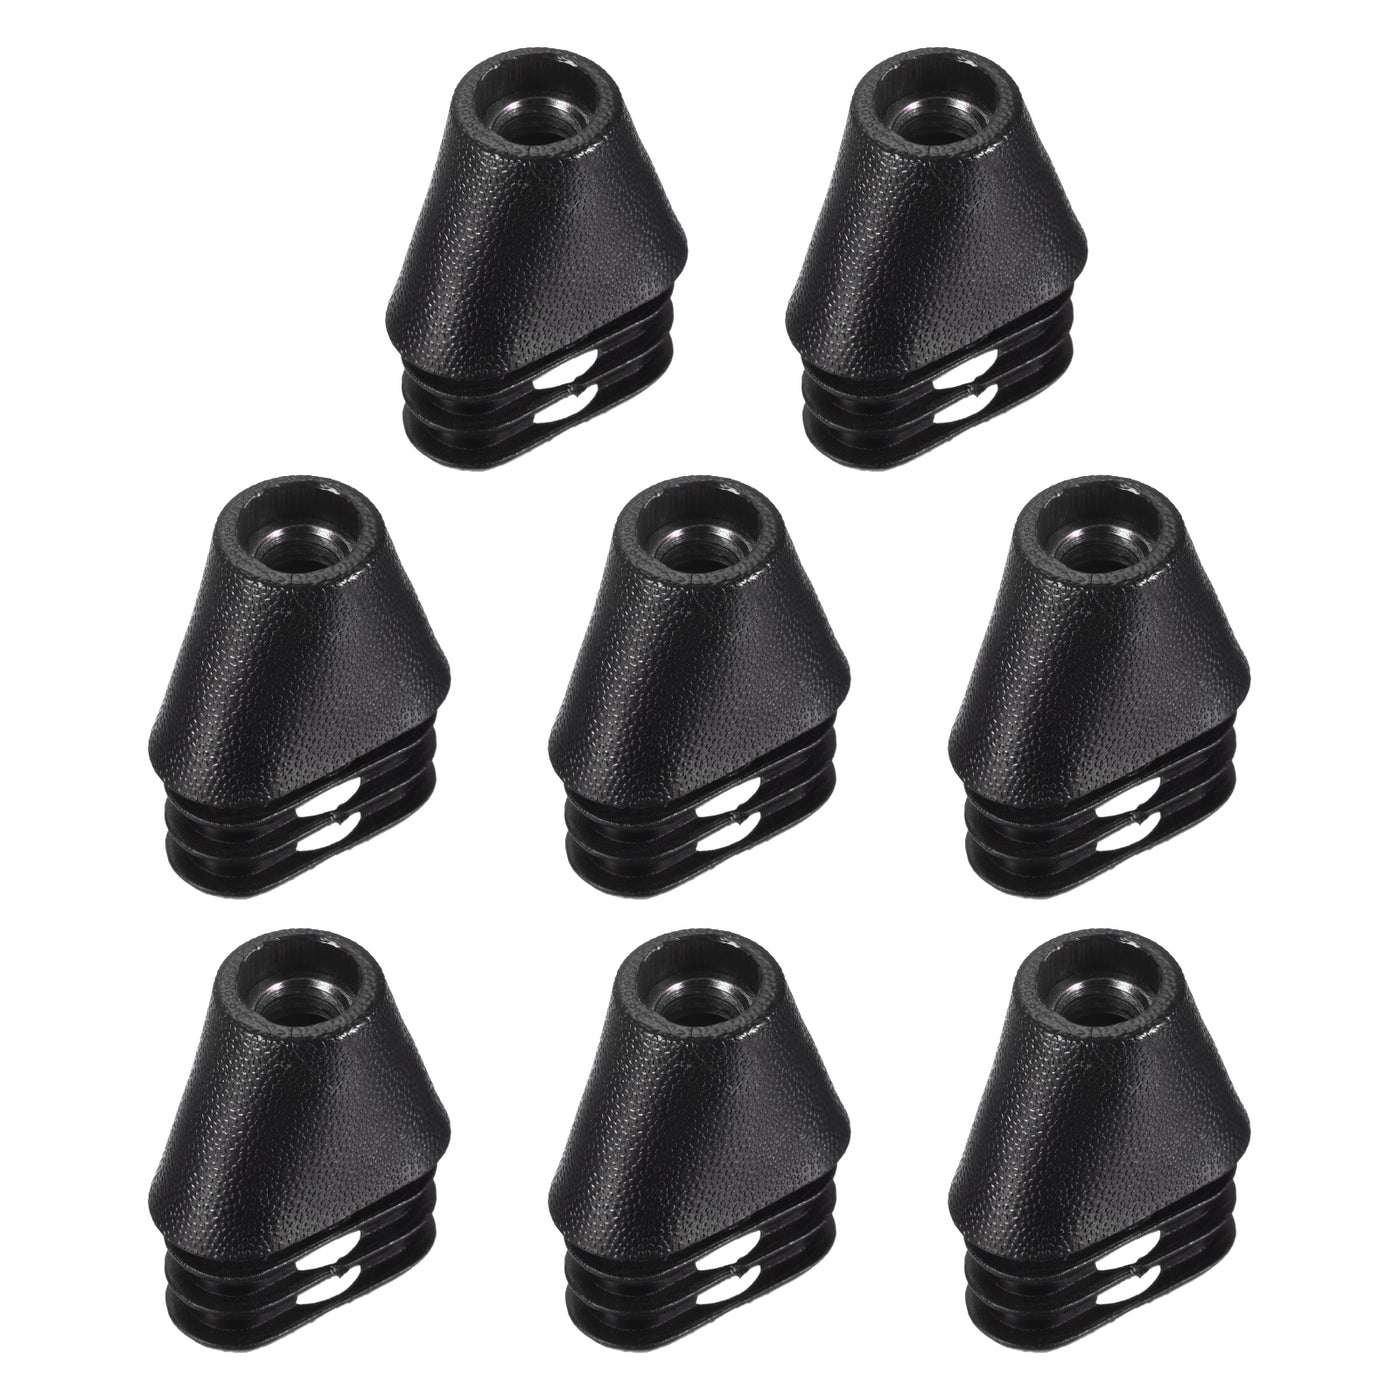 uxcell Uxcell 8Pcs 1.18"x0.59" Caster Insert with Thread, M8 Thread for Furniture